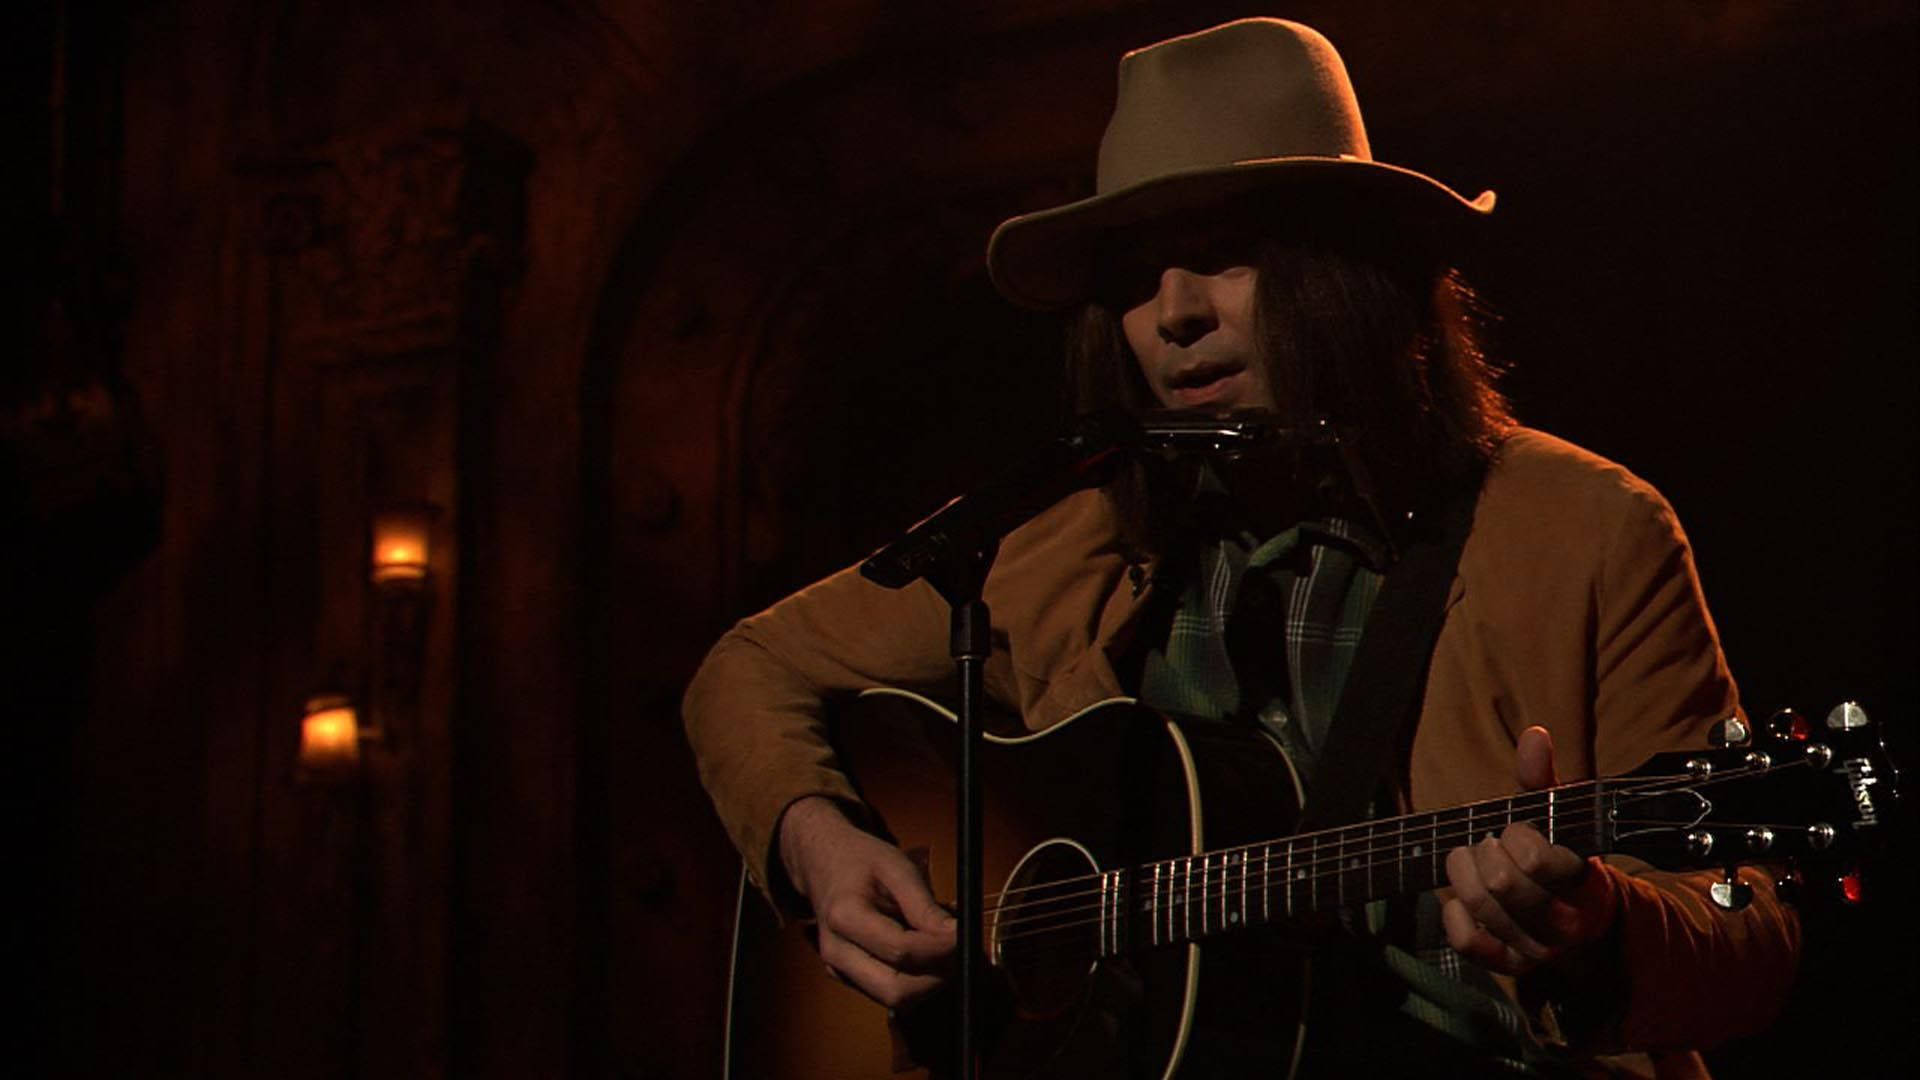 Neil Young, Pioneering Canadian Musician, Mesmerizing Performance With Acoustic Guitar